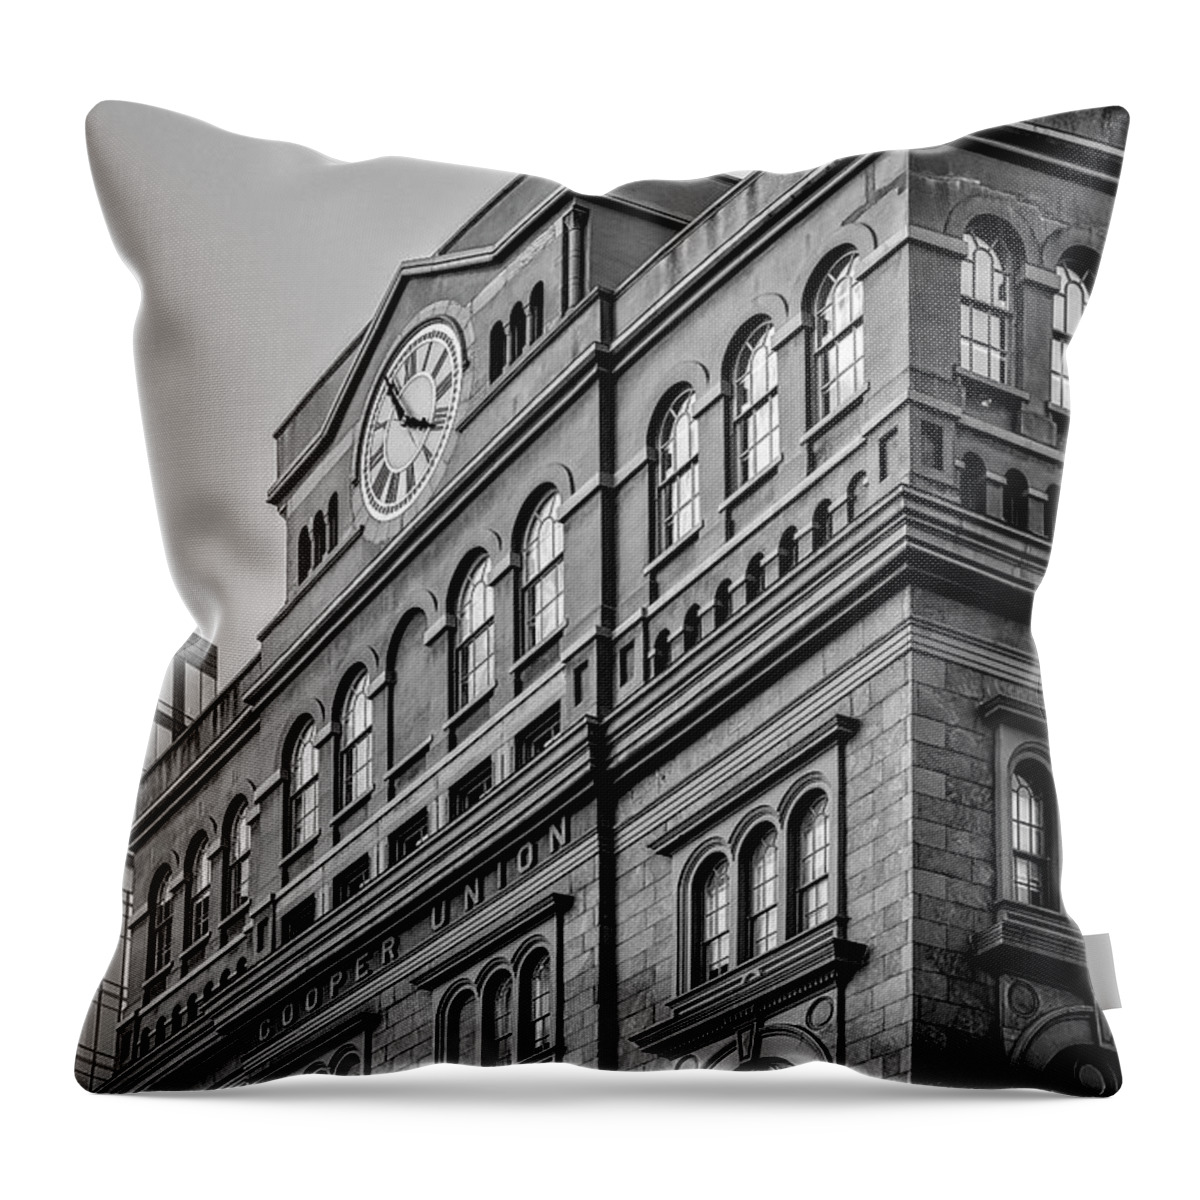 Cooper Union Throw Pillow featuring the photograph The Cooper Union BW by Susan Candelario